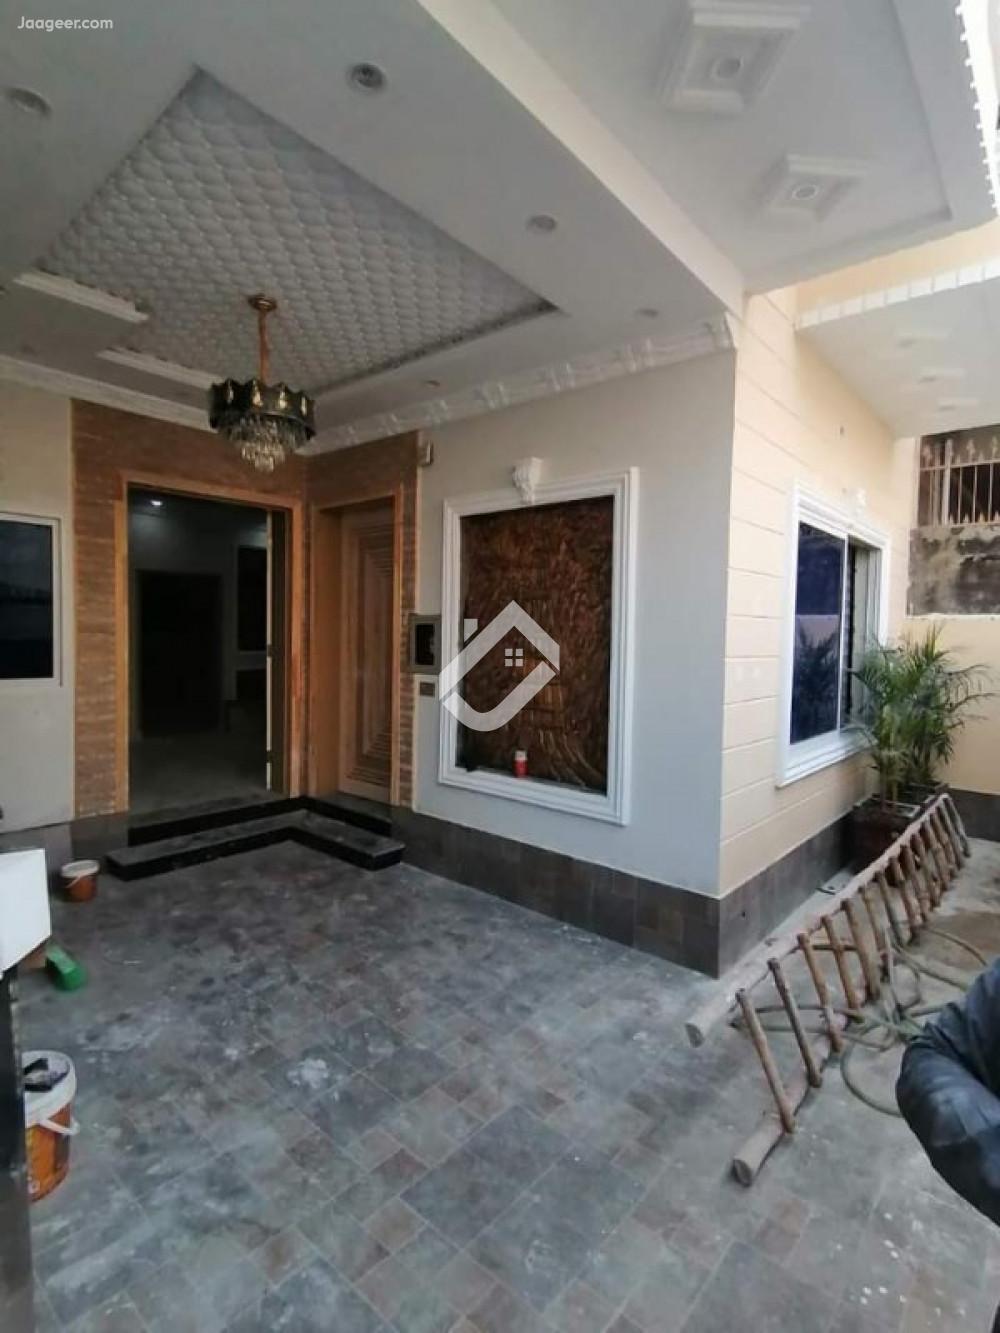 Main image 6 Marla Double Storey House For Sale In Al Rehman Garden Phase-2  Al Rehman Garden Phase 2, Lahore